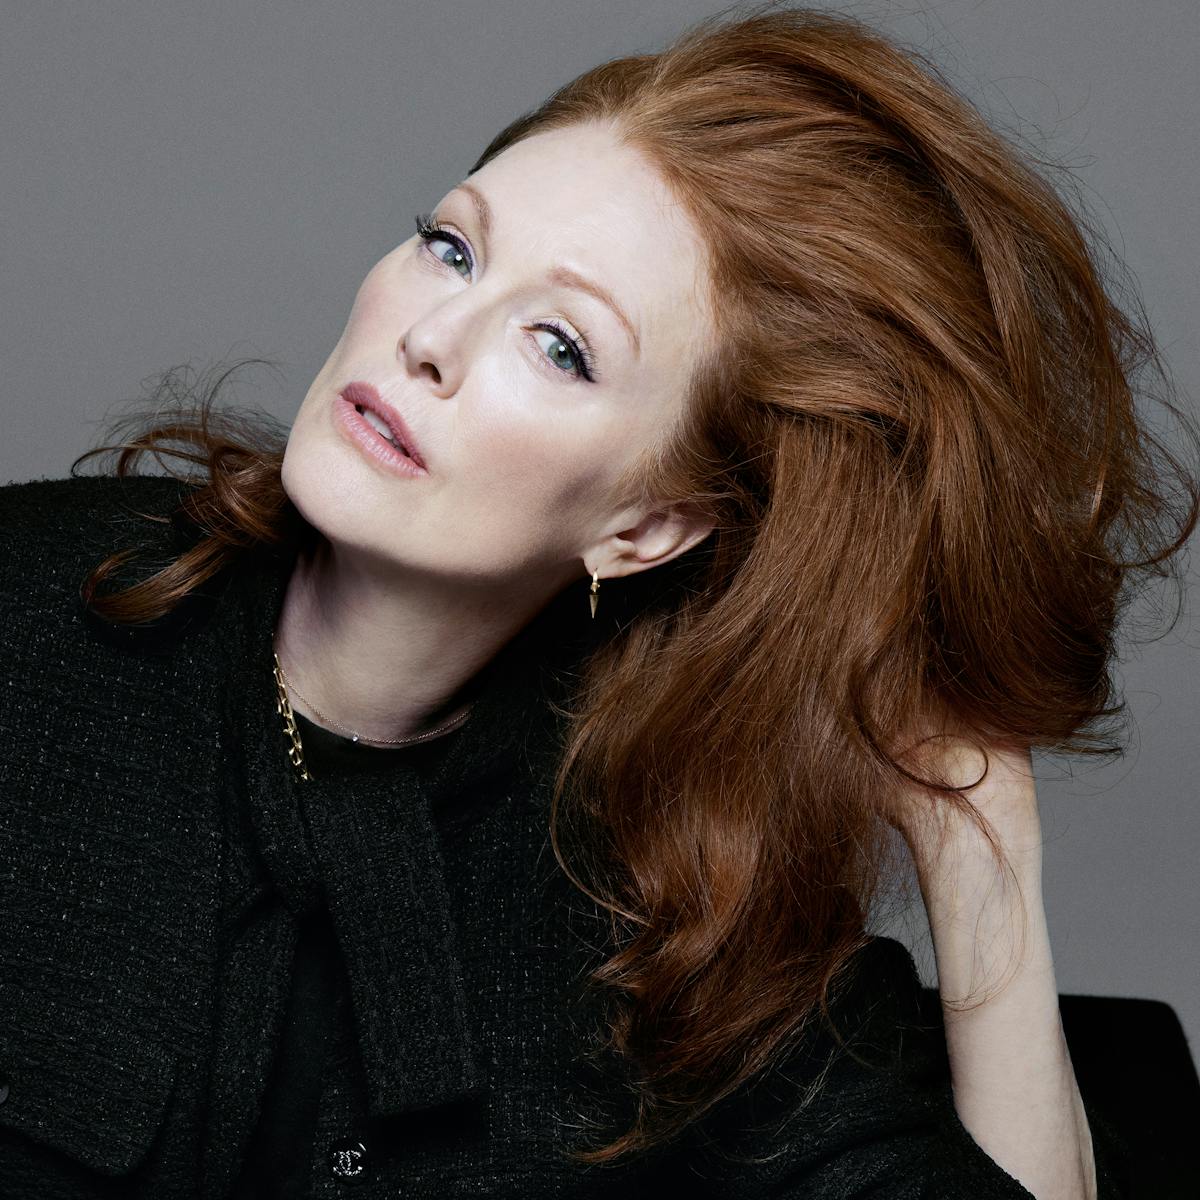 Julianne Moore wears a black ensemble and adjusts her red hair.